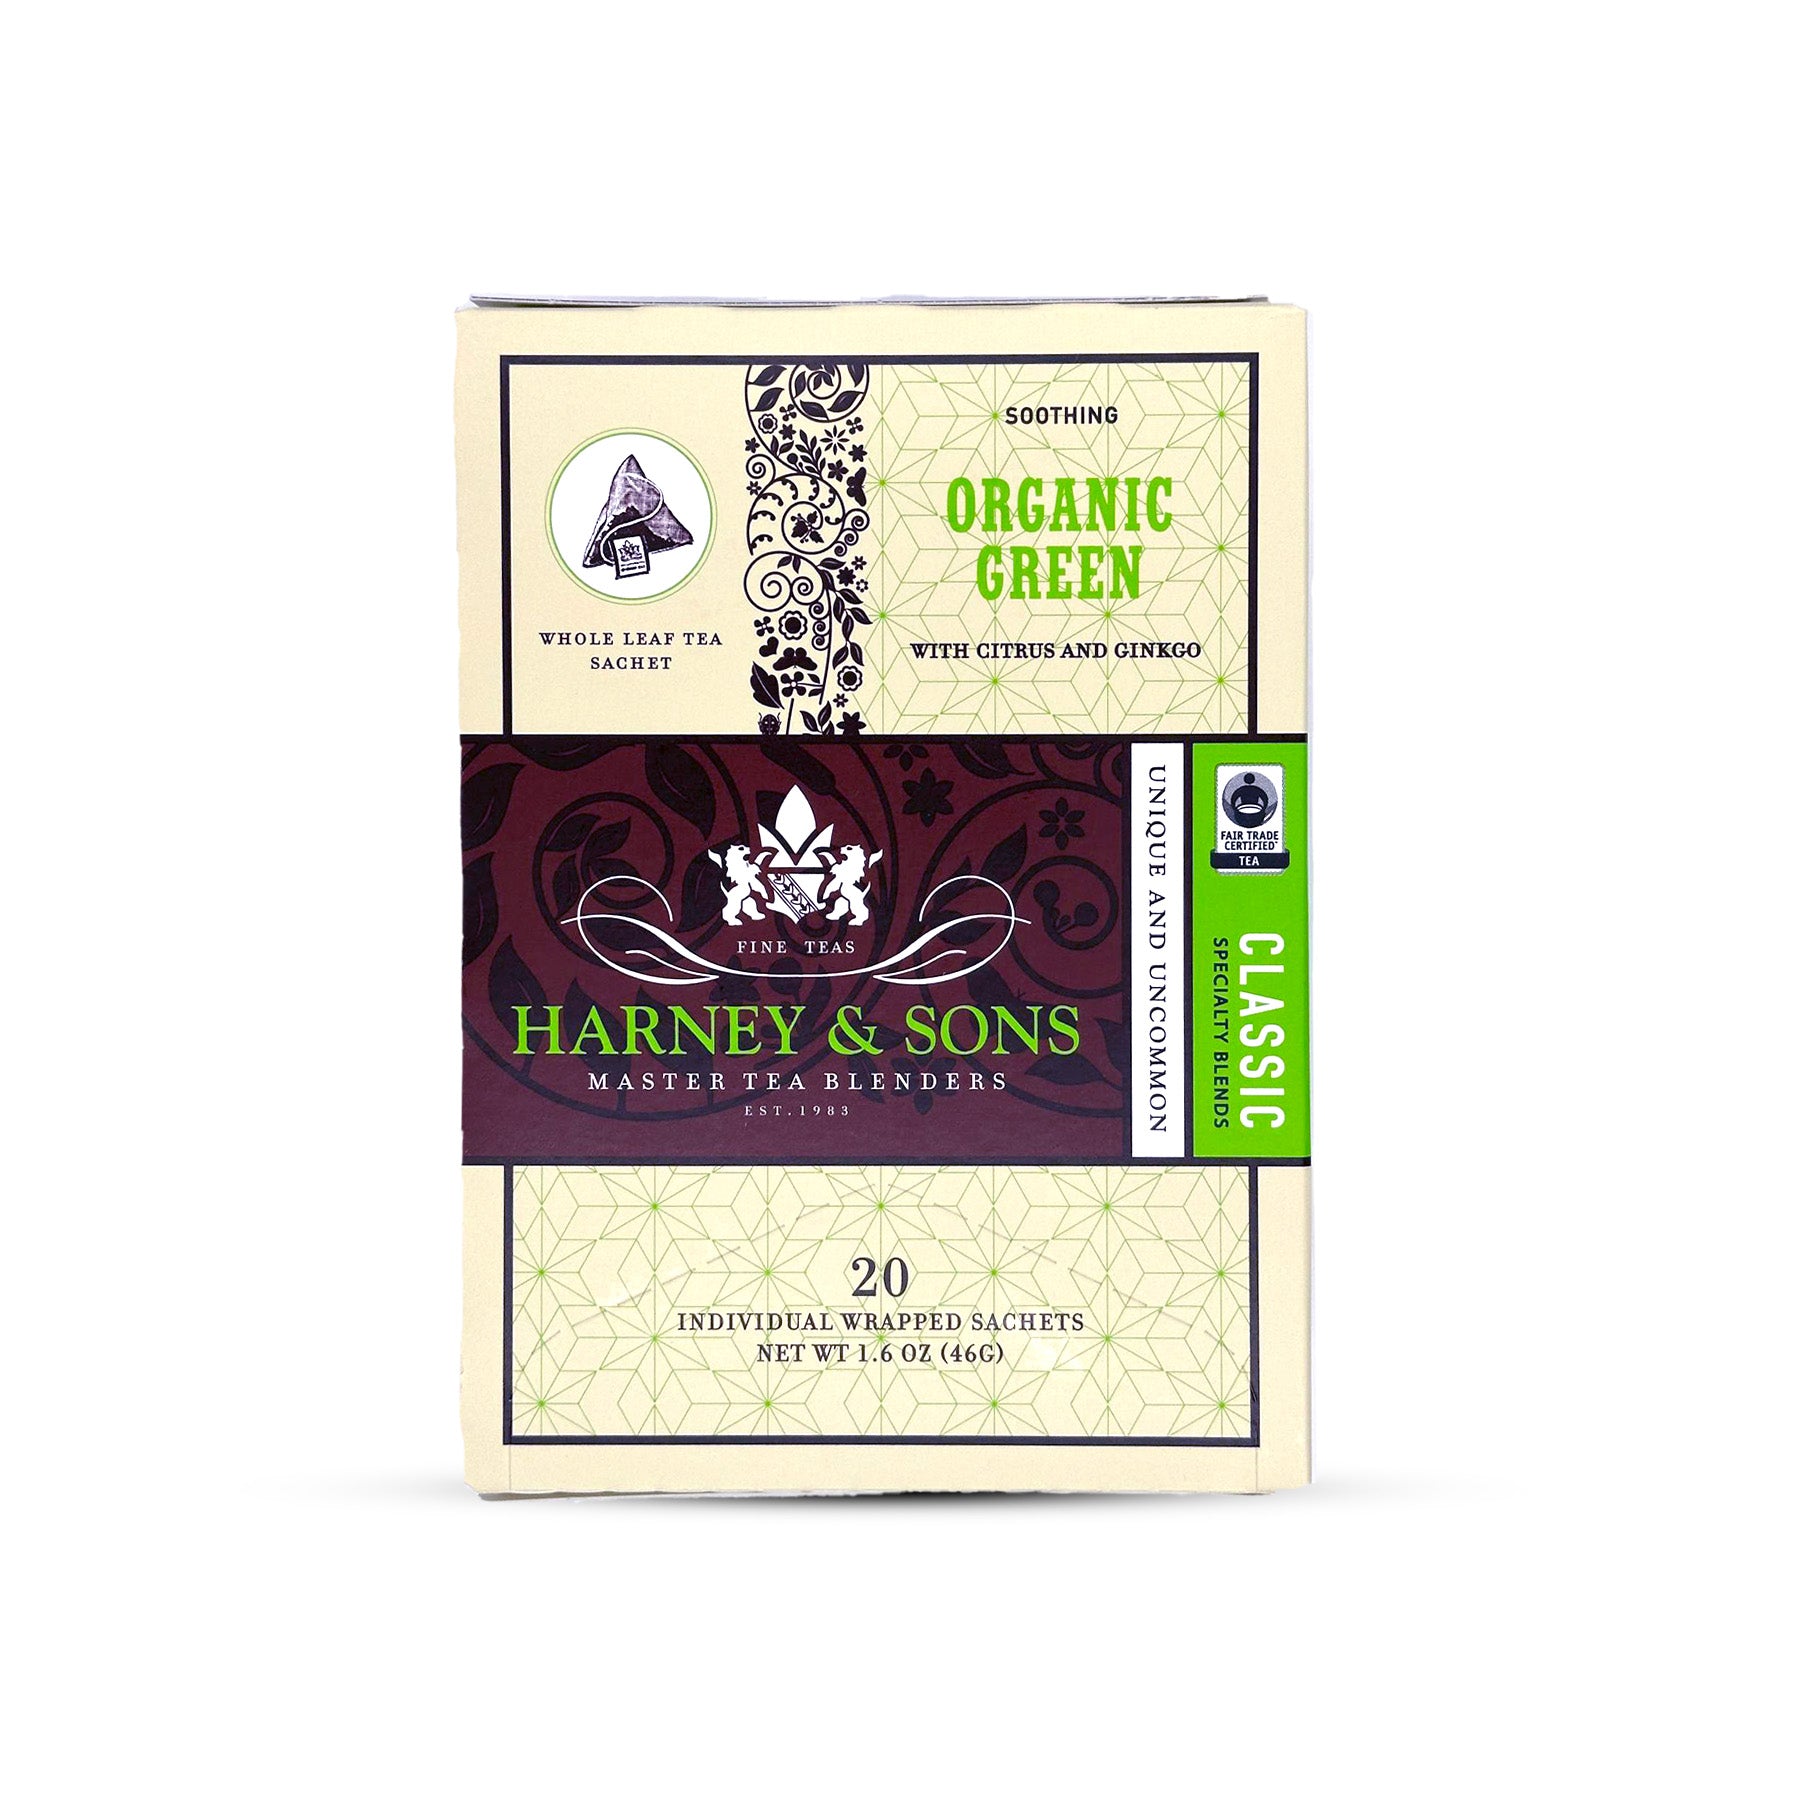 Organic Green with Citrus & Ginkgo - Box of 20 Individually Wrapped Sachets - Harney & Sons Fine Teas Europe